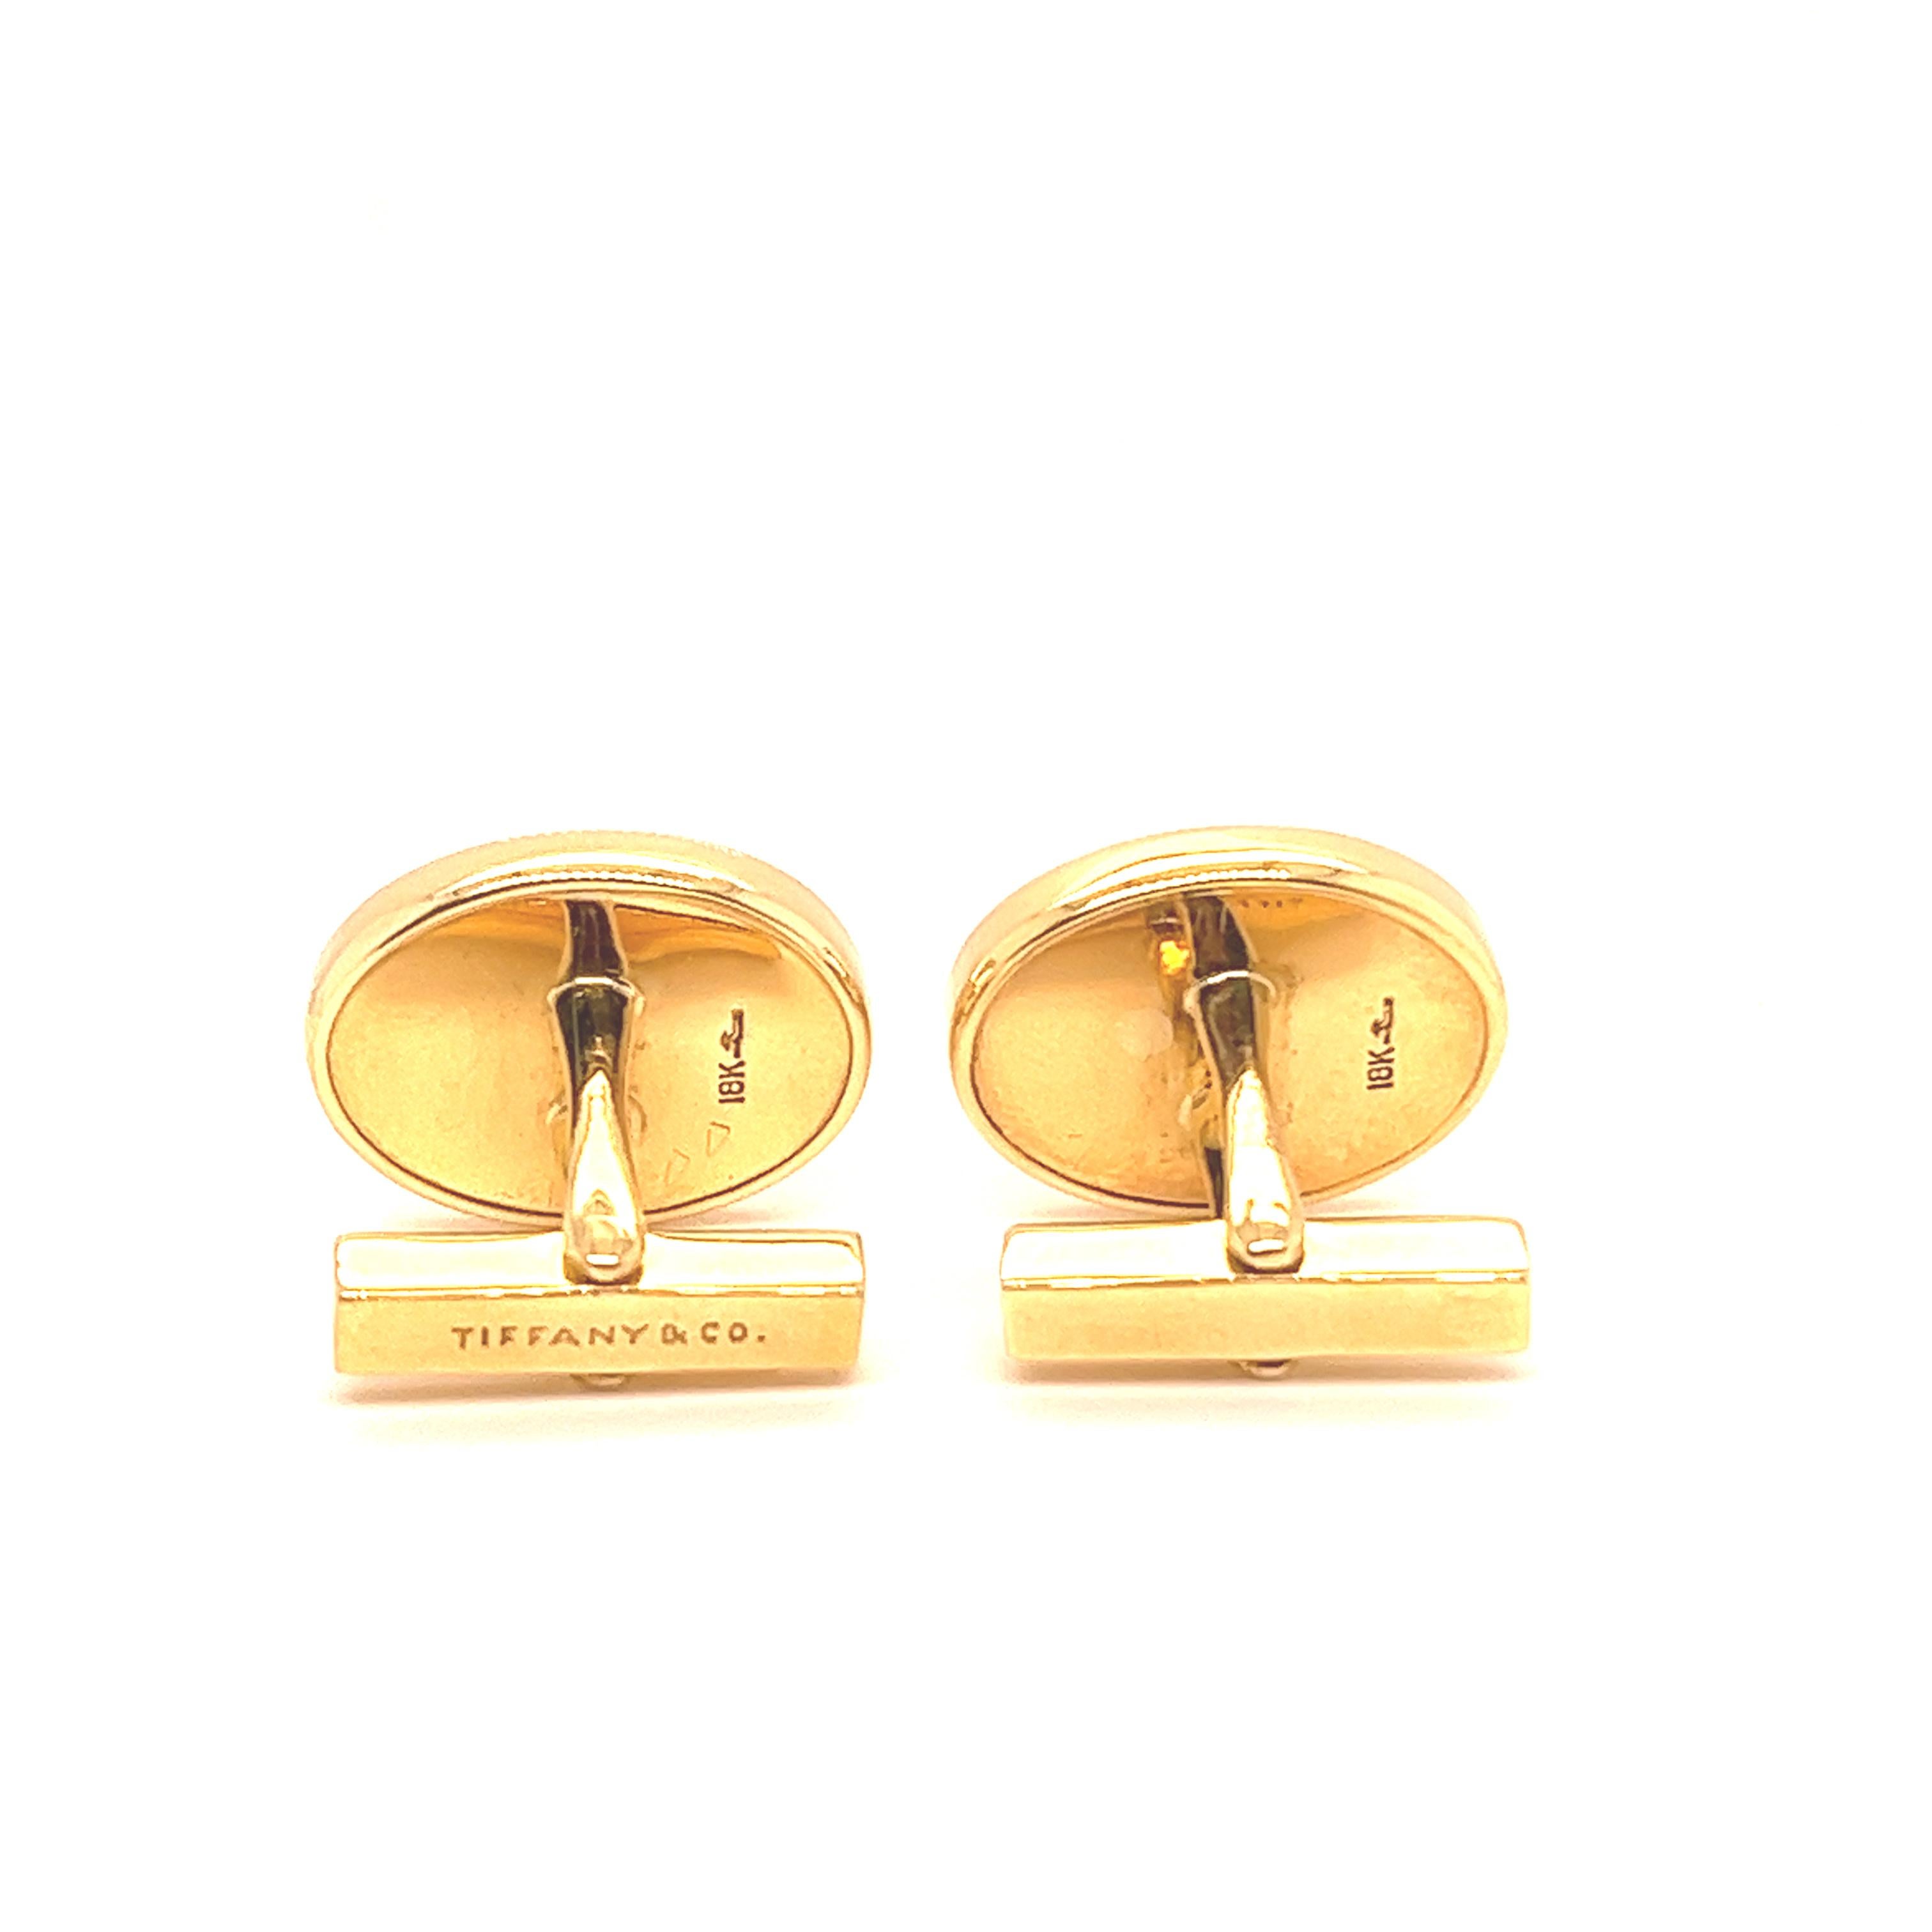 Elegant and classic gentleman's dress set, comprising a pair of cufflinks and three matching shirt studs in 18 karat yellow gold and black onyx, signed Tiffany & Co. 

The timeless, oval cufflinks are crafted in solid 18 karat yellow gold with high